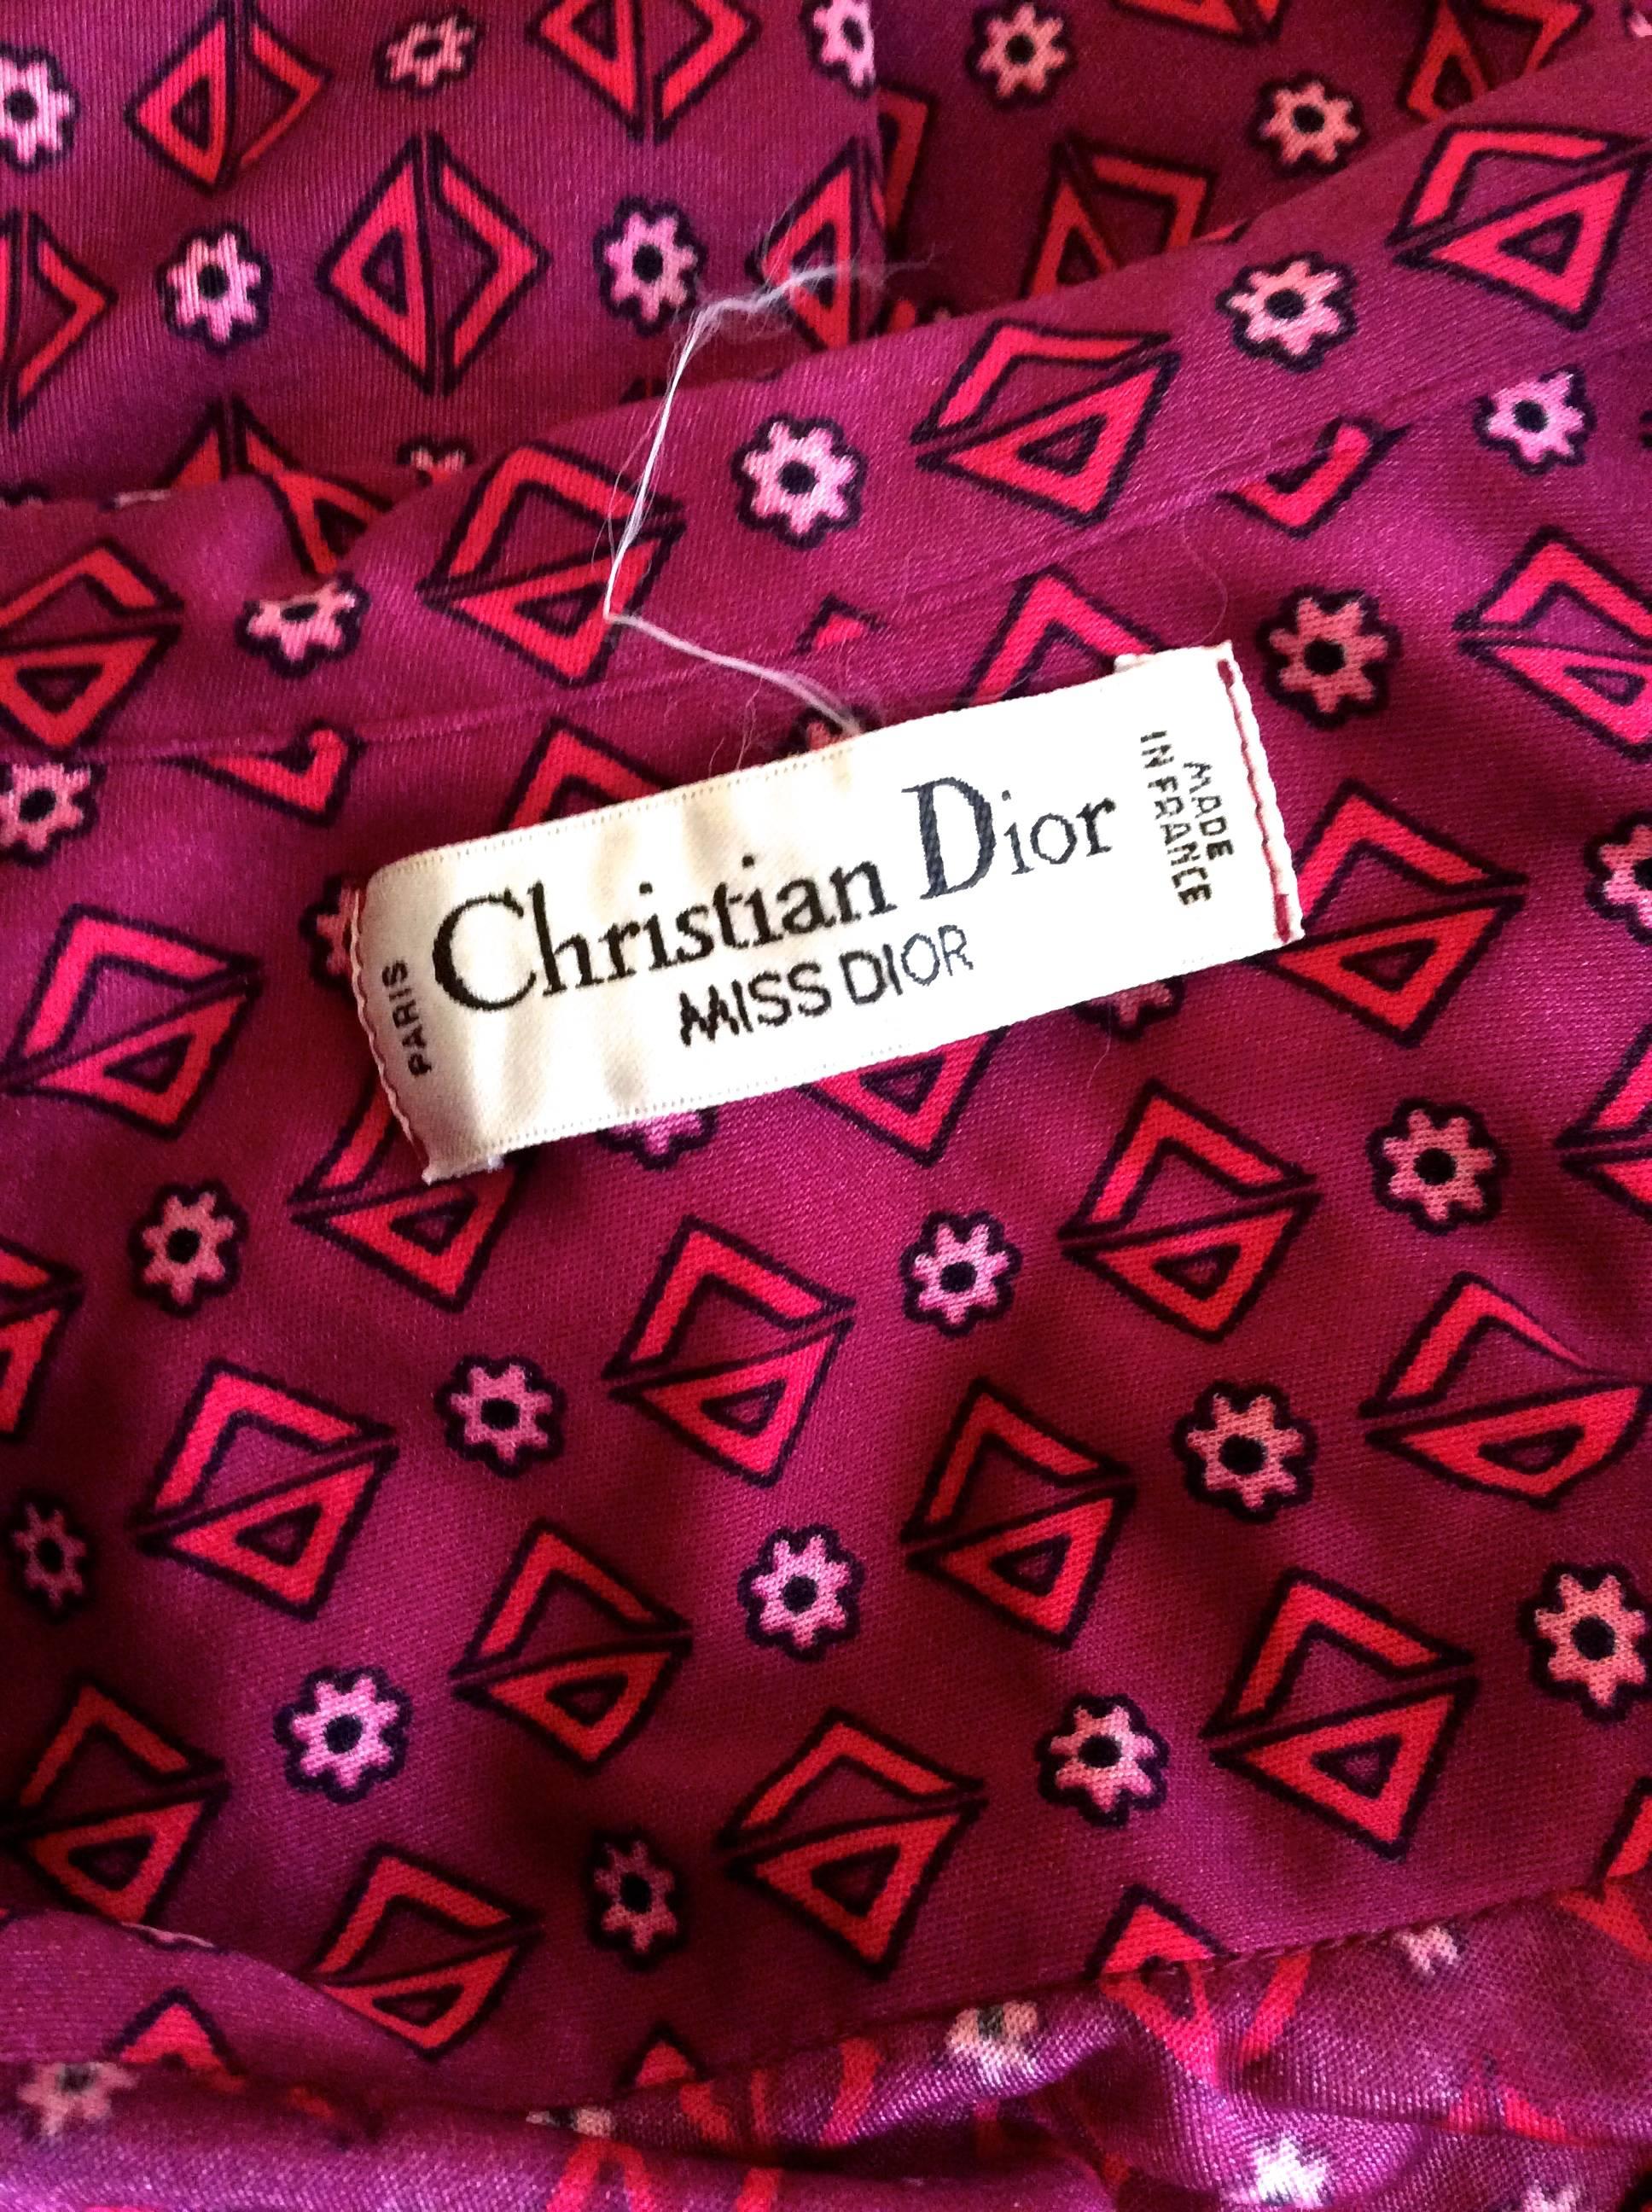 Christian Dior - Miss Dior 1970's Maxi Day Dress For Sale 2